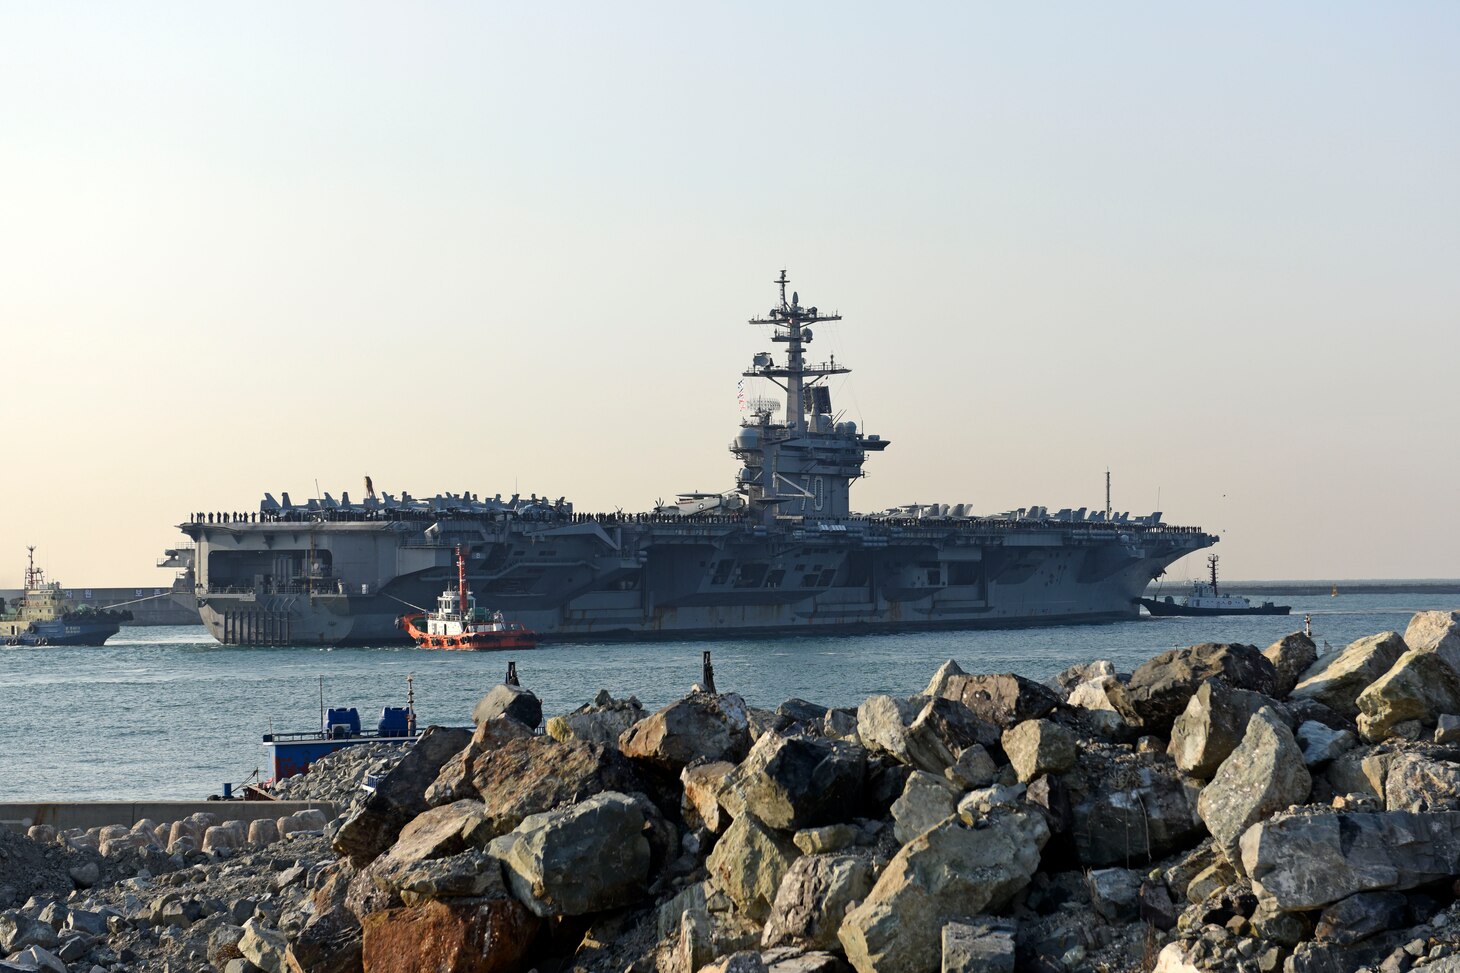 Nimitz-class aircraft carrier, USS Carl Vinson (CVN-70) pulls into Republic of Korea (ROK) Fleet headquarters March 15. The Carl Vinson Carrier Strike Group is on a regularly scheduled Western Pacific deployment as part of the U.S. Pacific Fleet-led initiative to extend the command and control functions of U.S. 3rd Fleet. 